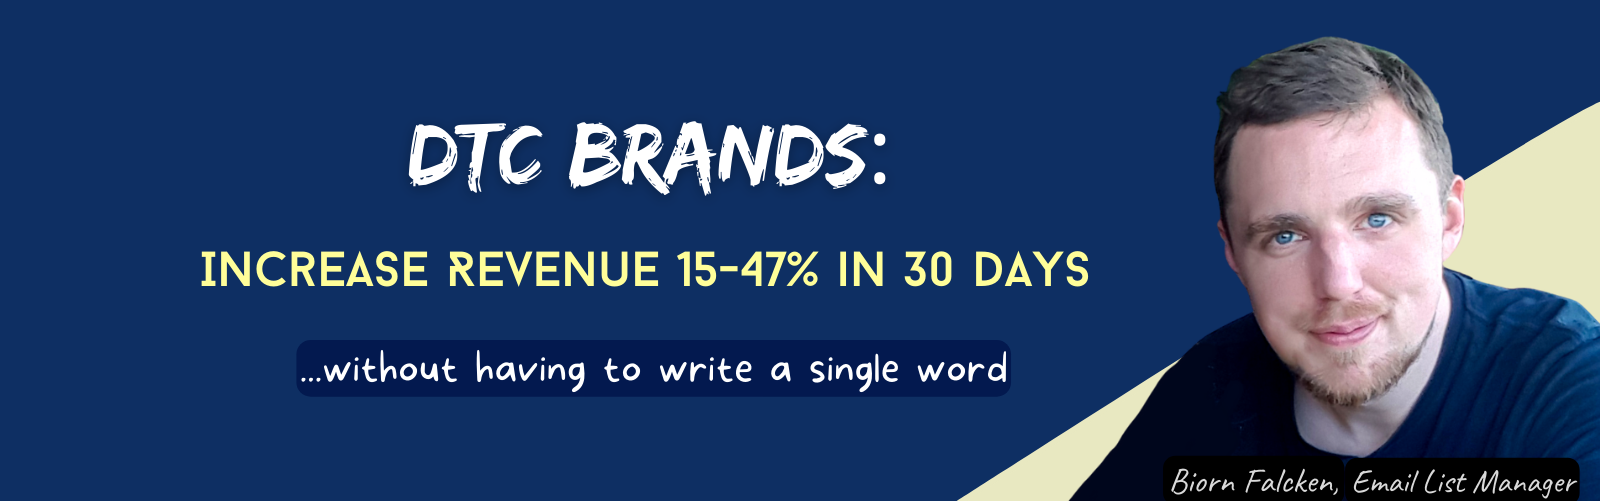 DTC Brands: Increase Revenue 15-47% in 30 days without having to write a single word